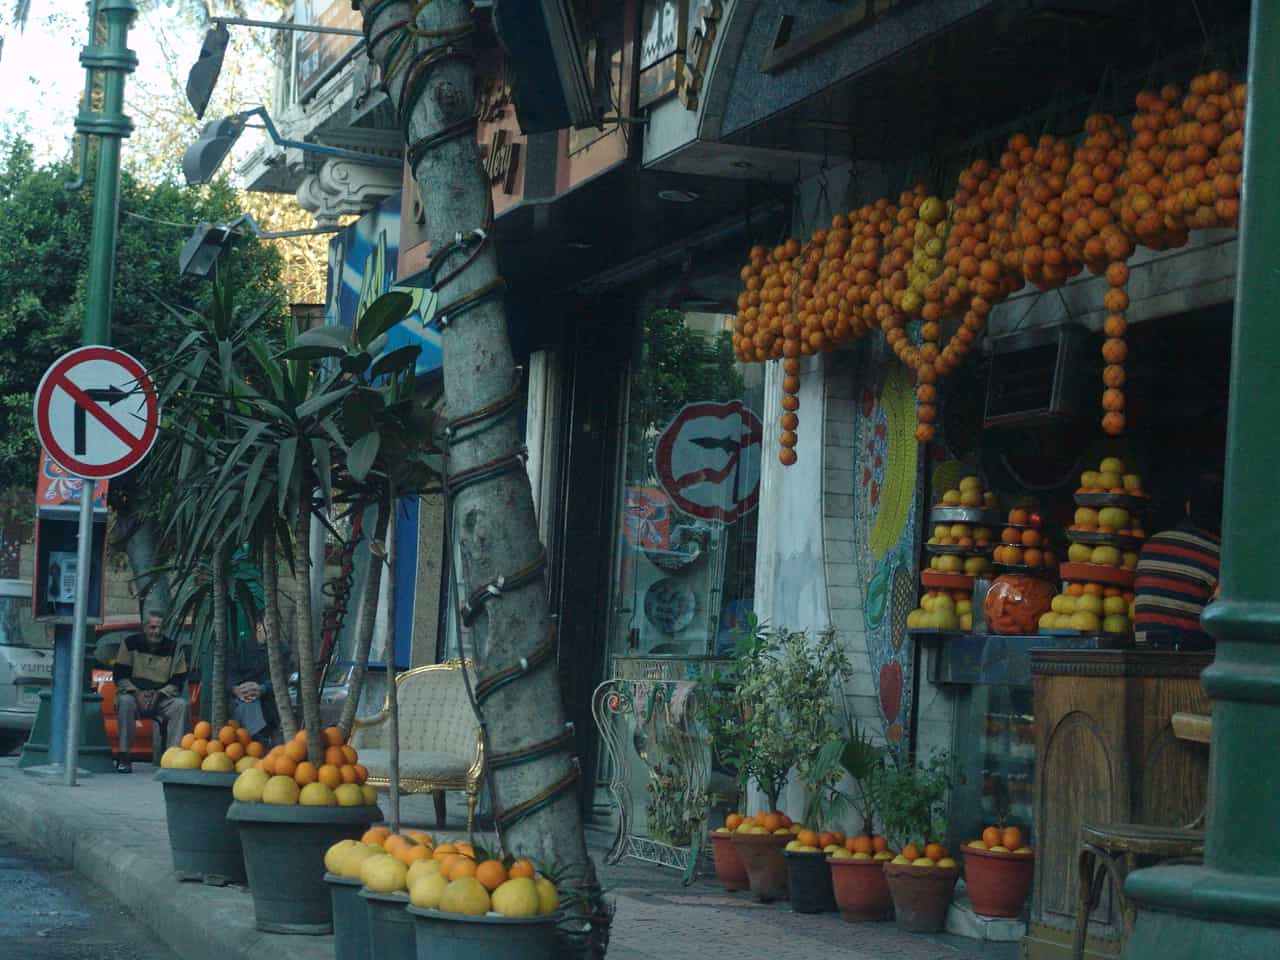 Fruit stand in Cairo, Egypt